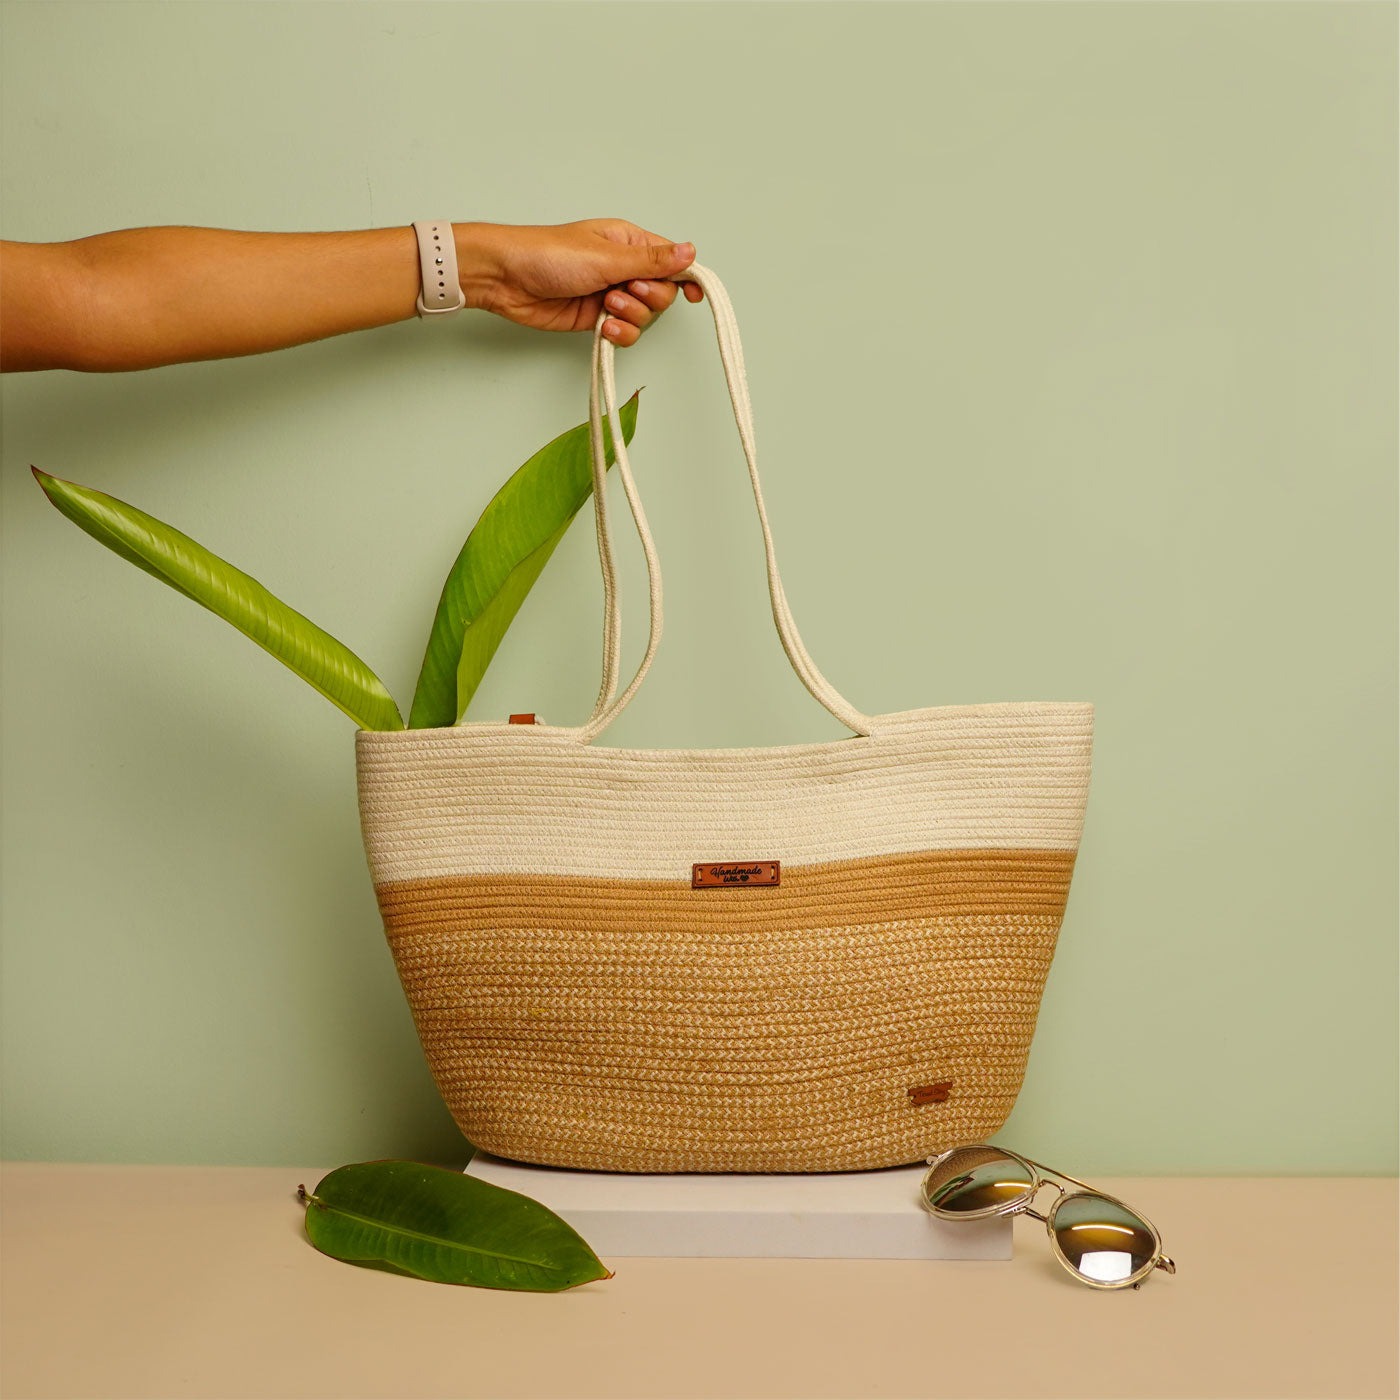 TCT Tote Bag — The Cultivated Thread